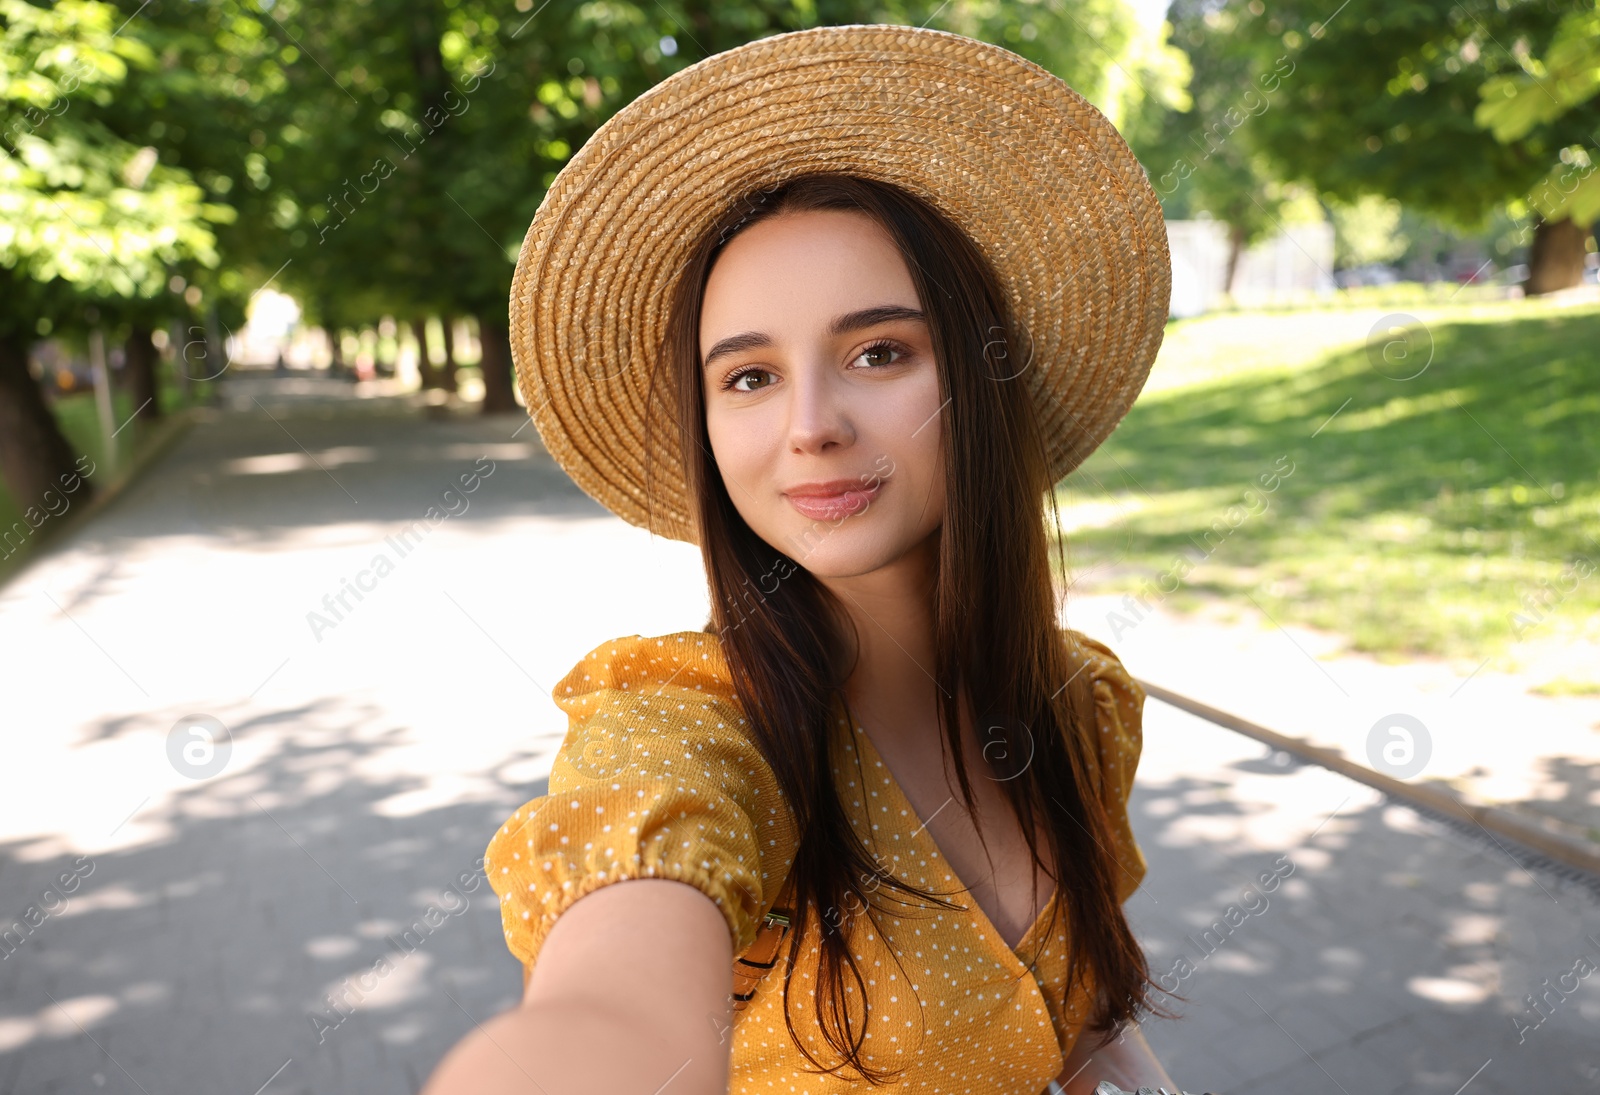 Photo of Travel blogger in straw hat takIng selfie outdoors